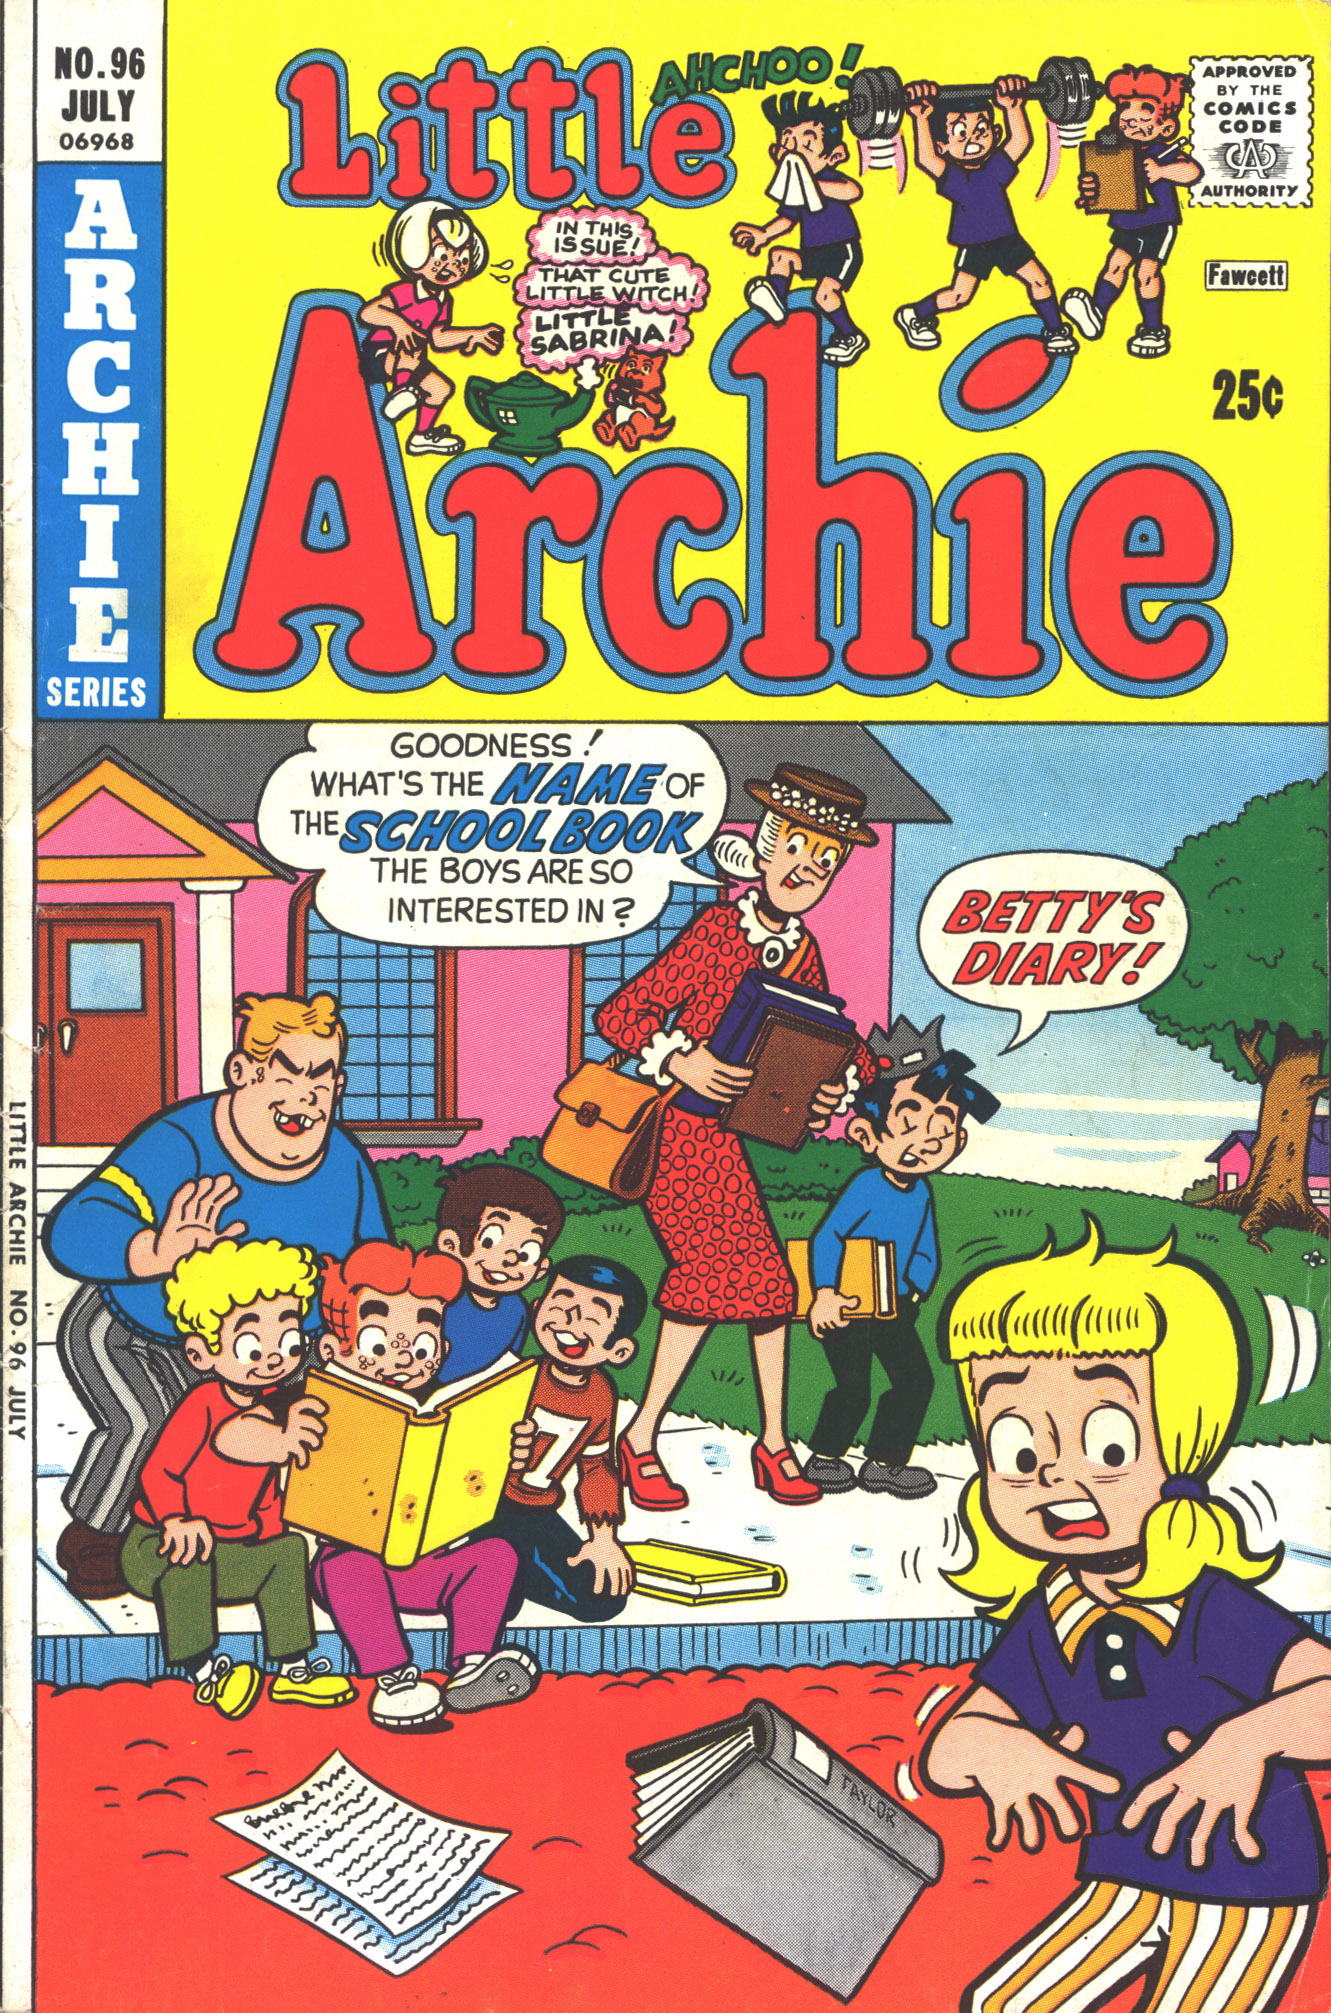 Read online The Adventures of Little Archie comic -  Issue #96 - 1